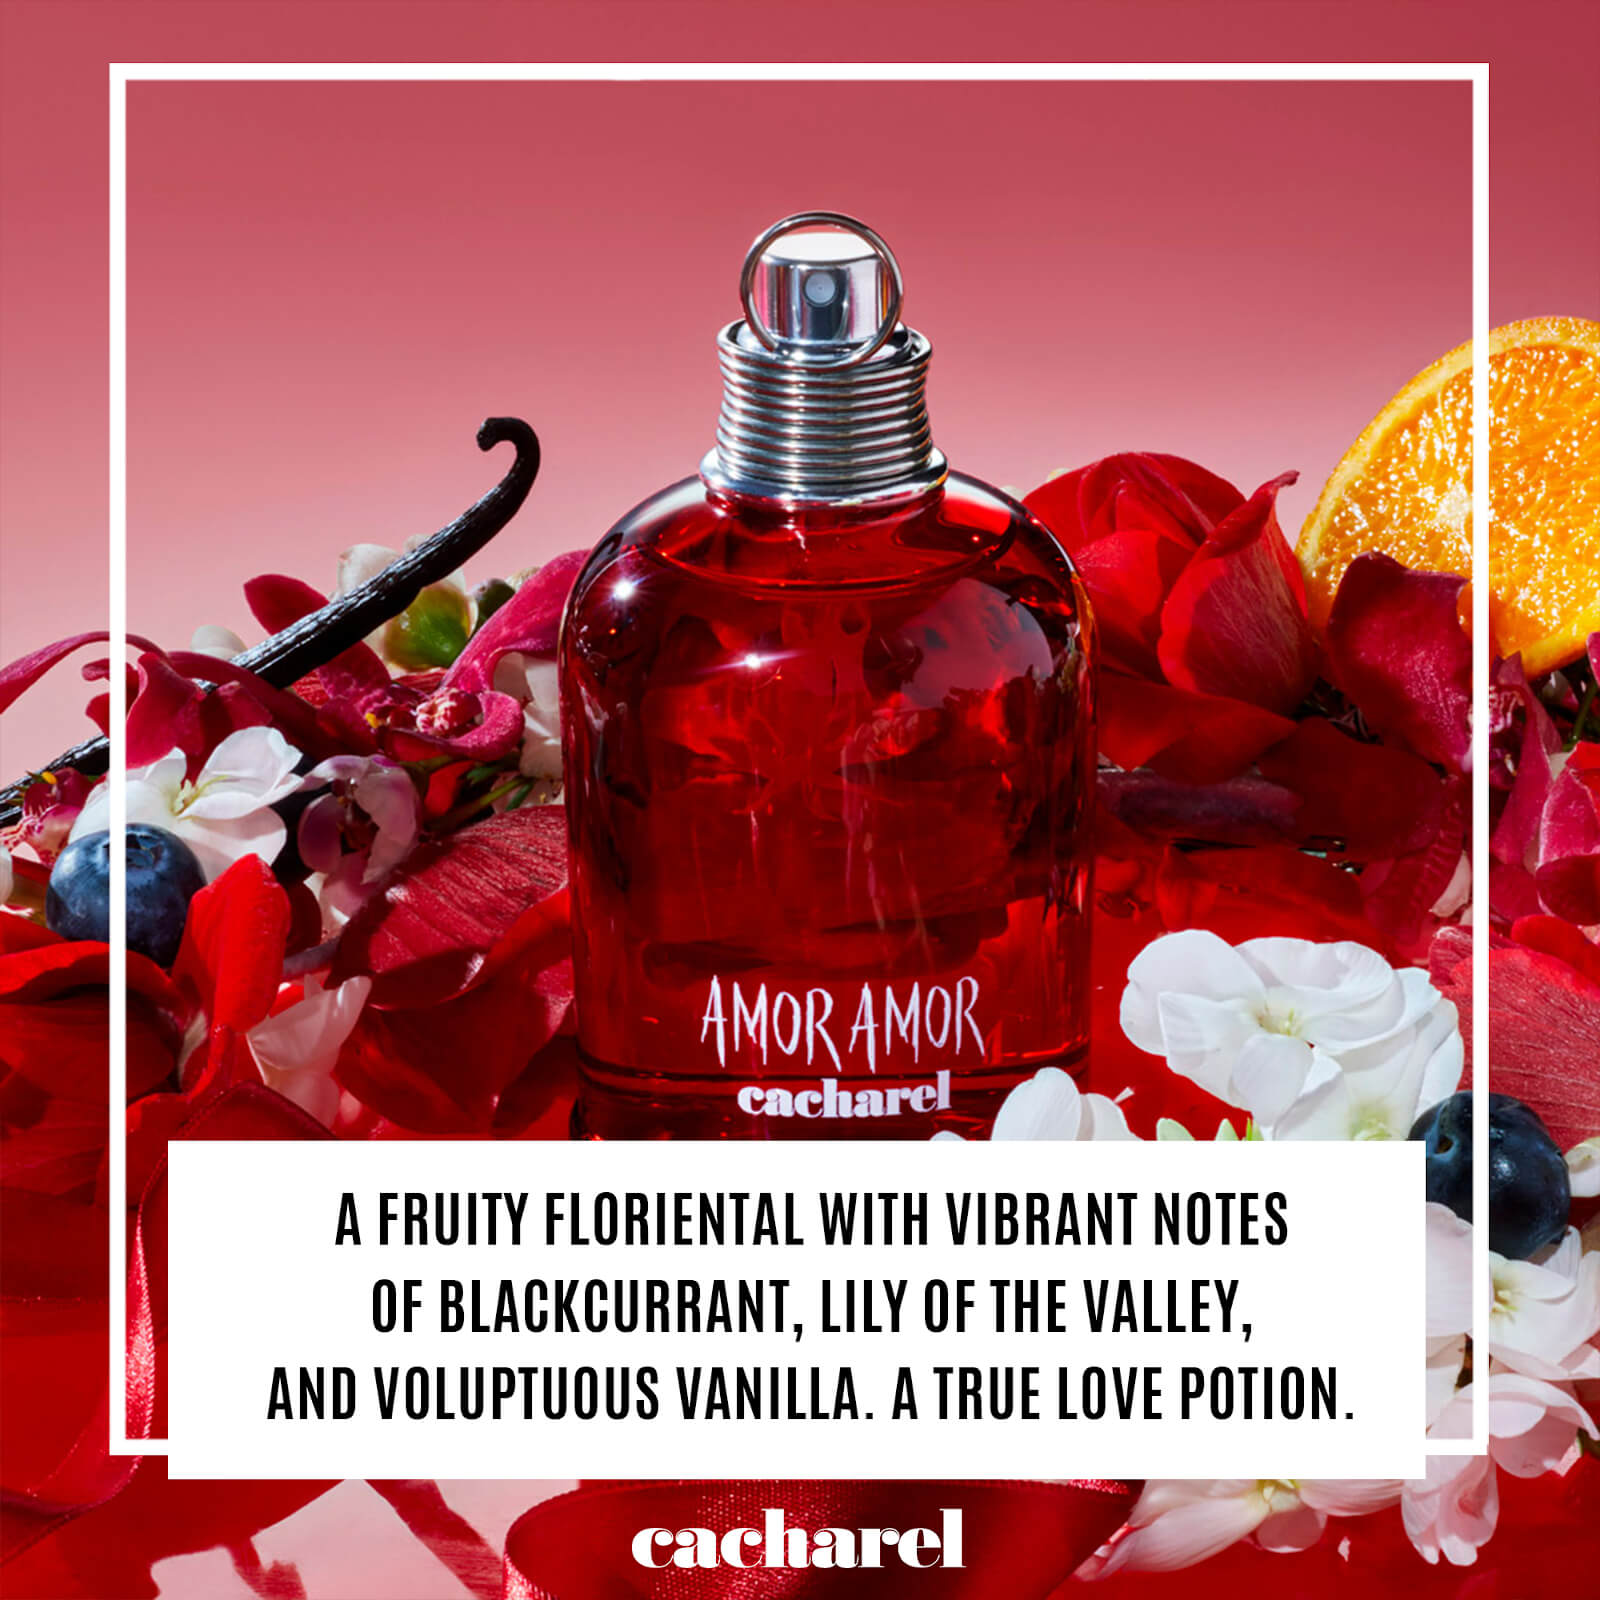 A Fruity Floriental With Vibrant Notes Of Blackcurrant, Lily Of The Valley, And Voluptuous Vanilla. A True Love Potion.